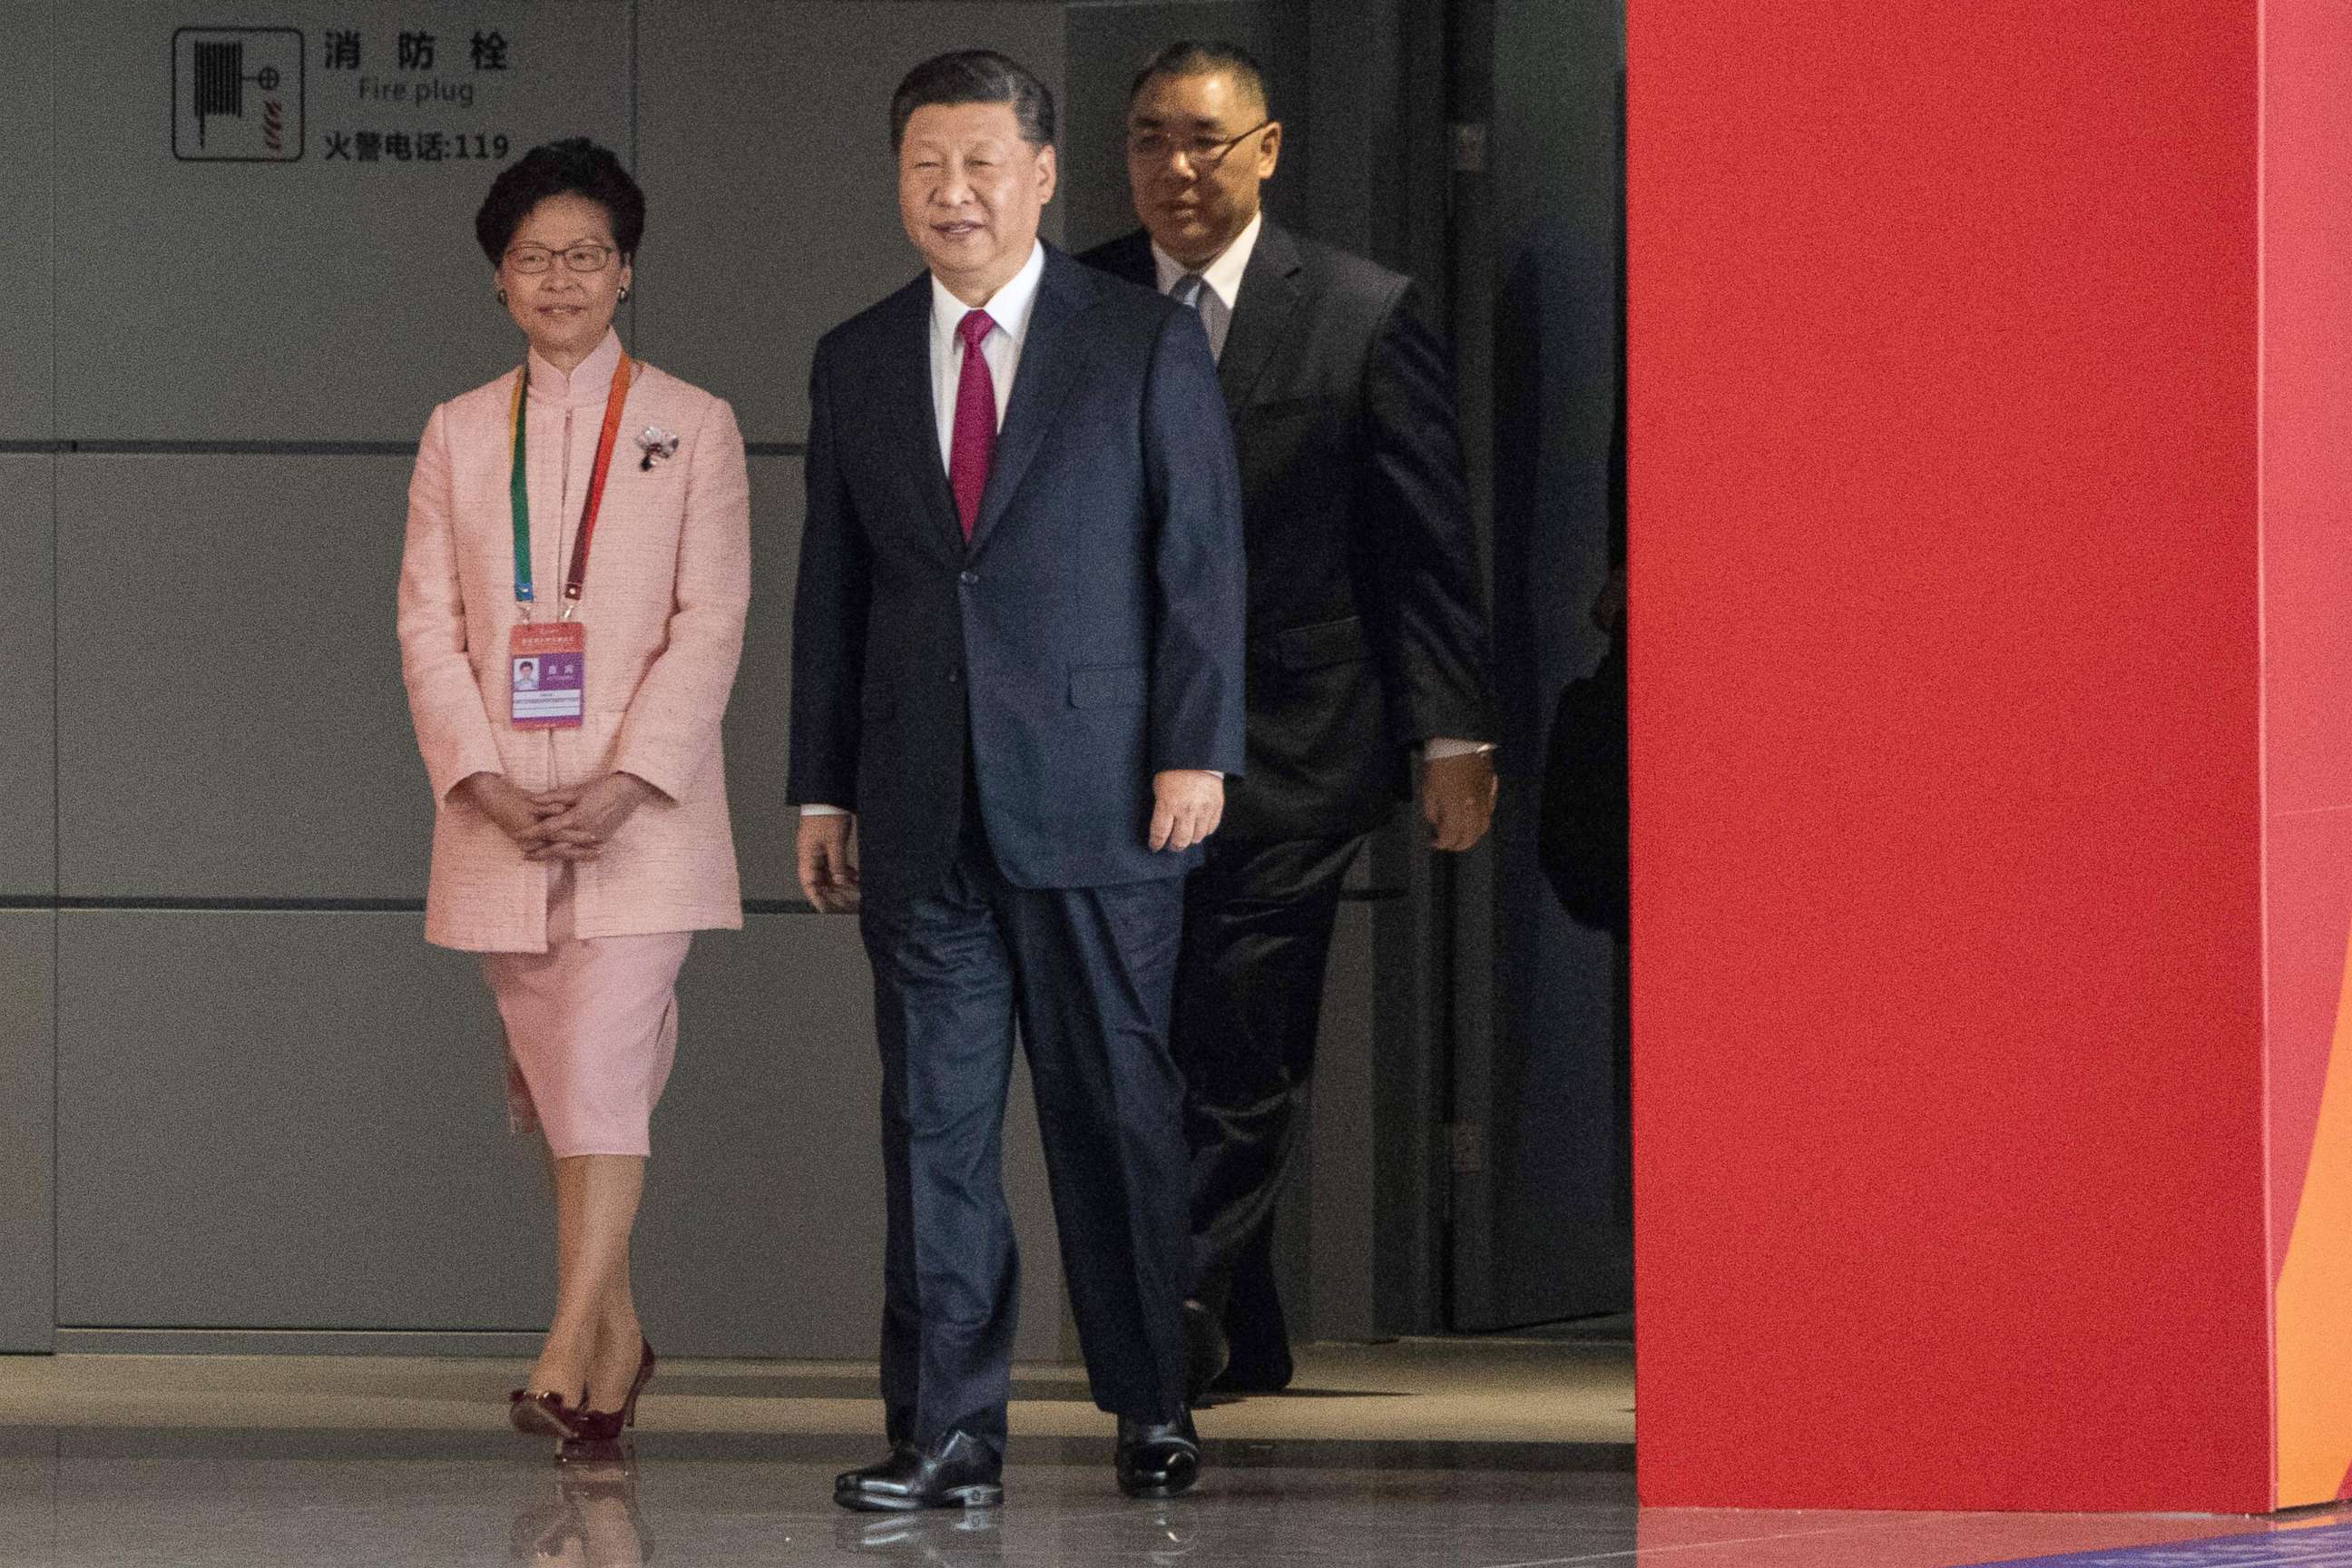 PHOTO: Hong Kong's Chief Executive Carrie Lam and China's President Xi Jinping arrive at the opening ceremony of the Hong Kong-Zhuhai-Macau Bridge at the Zhuhai Port terminal, Oct. 23, 2018.